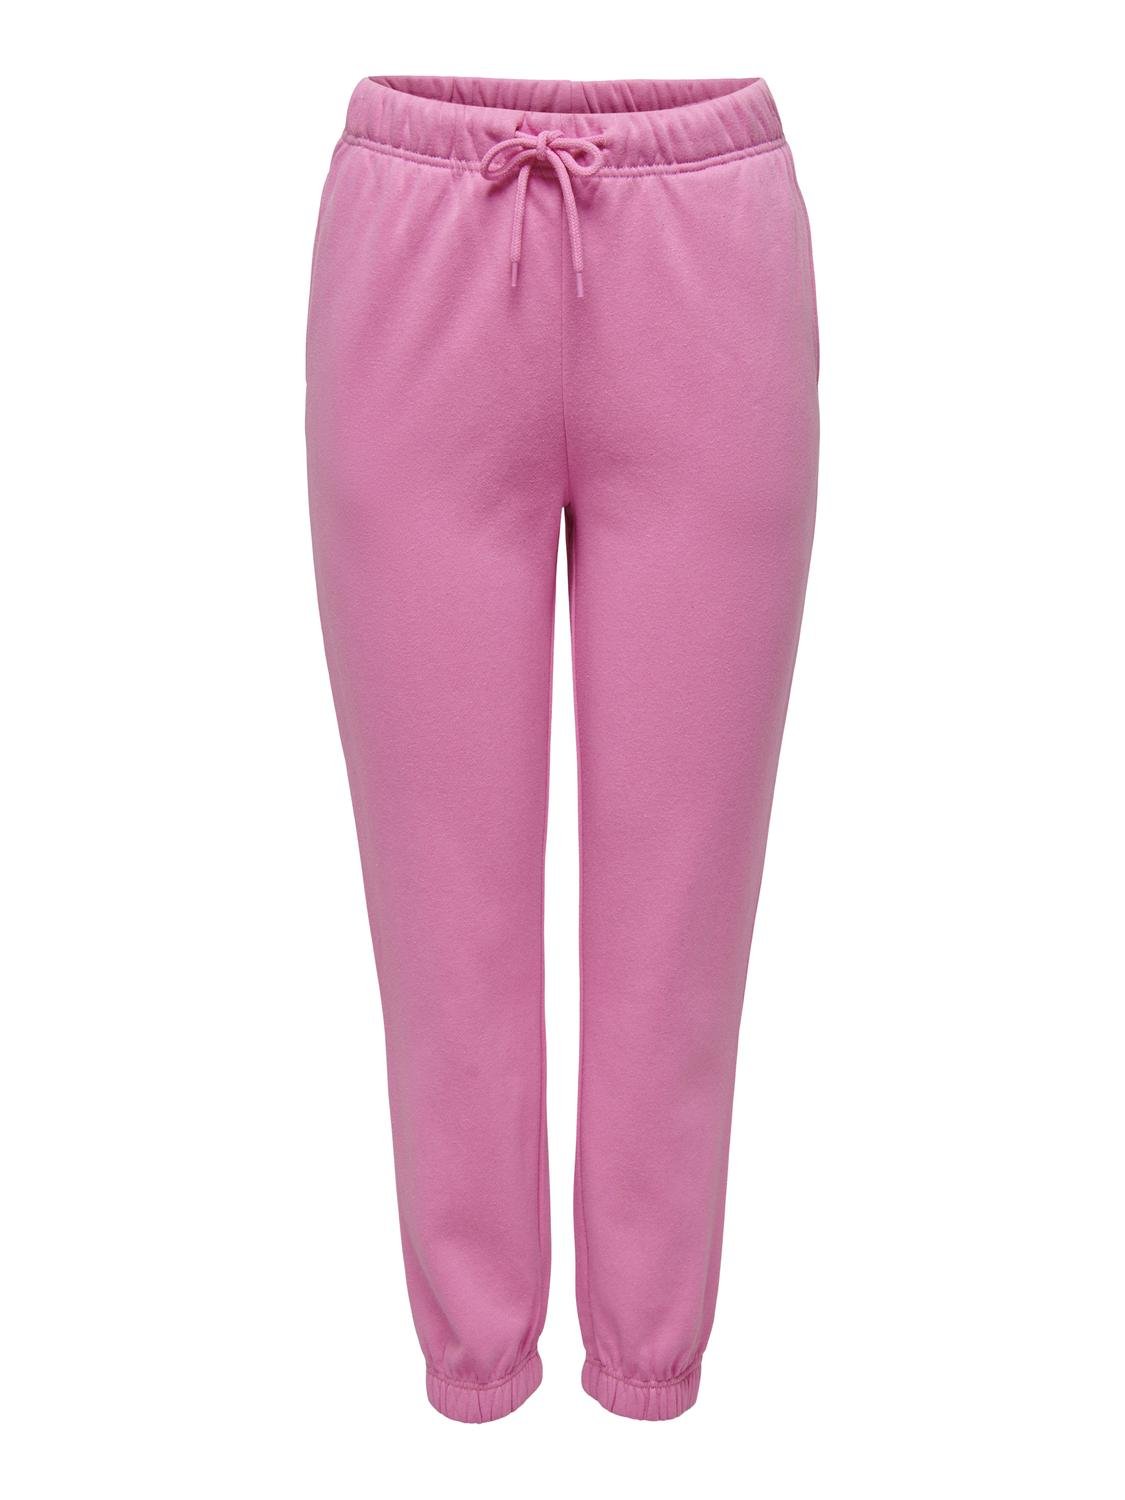 ONLY Solid color sweatpants -Fuchsia Pink - 15321402